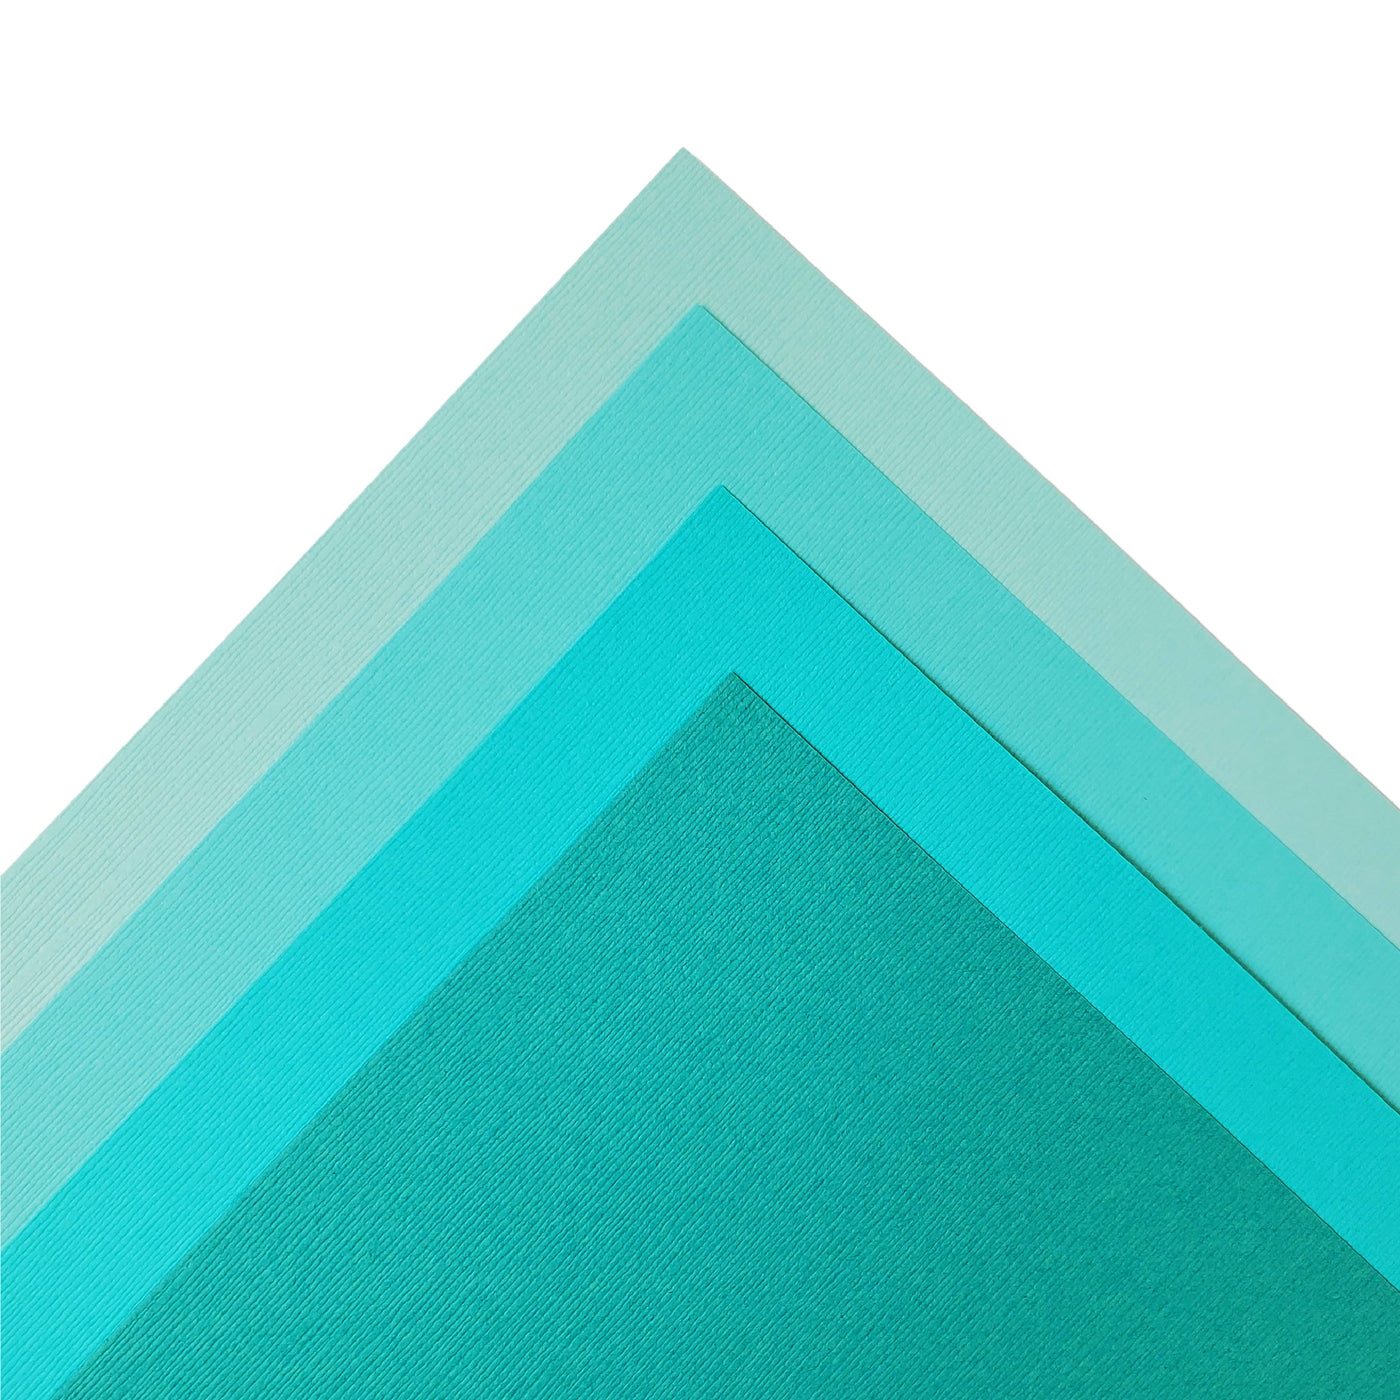 The Turquoise monochromatic assortment includes three (3) each of four (4) shades of turquoise blue colors of Bazzill textured cardstock.